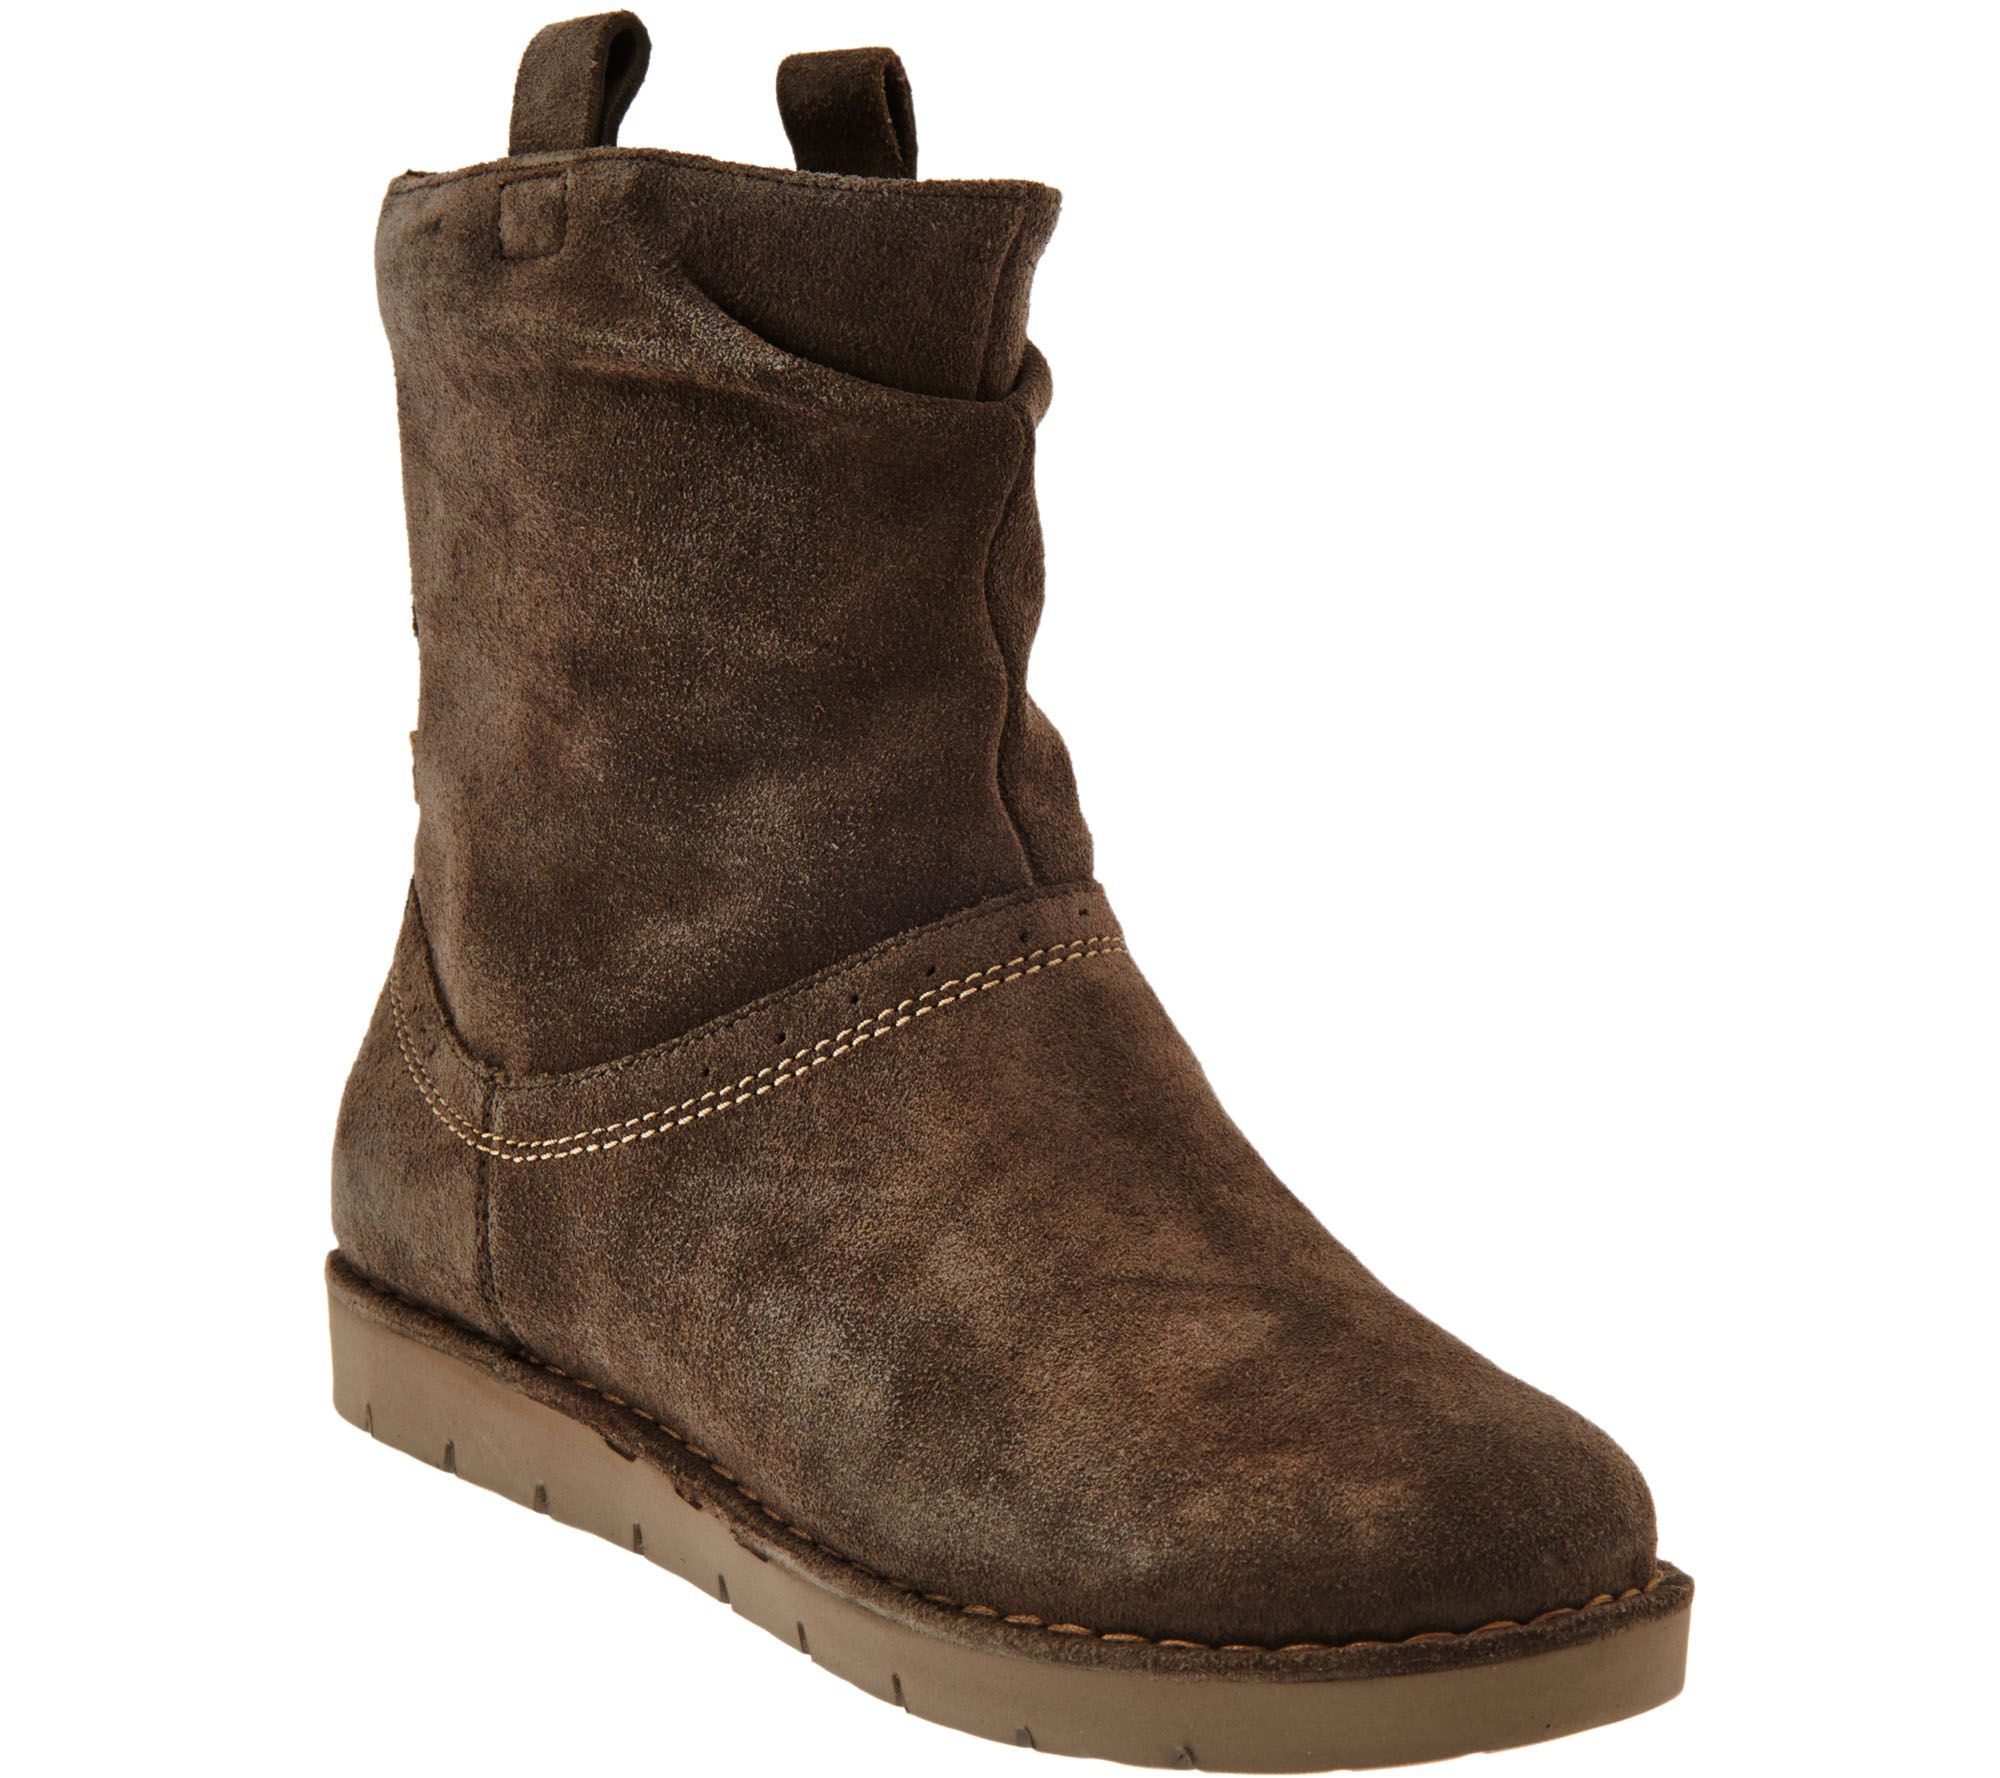 Clarks Unstructured Suede Boots -